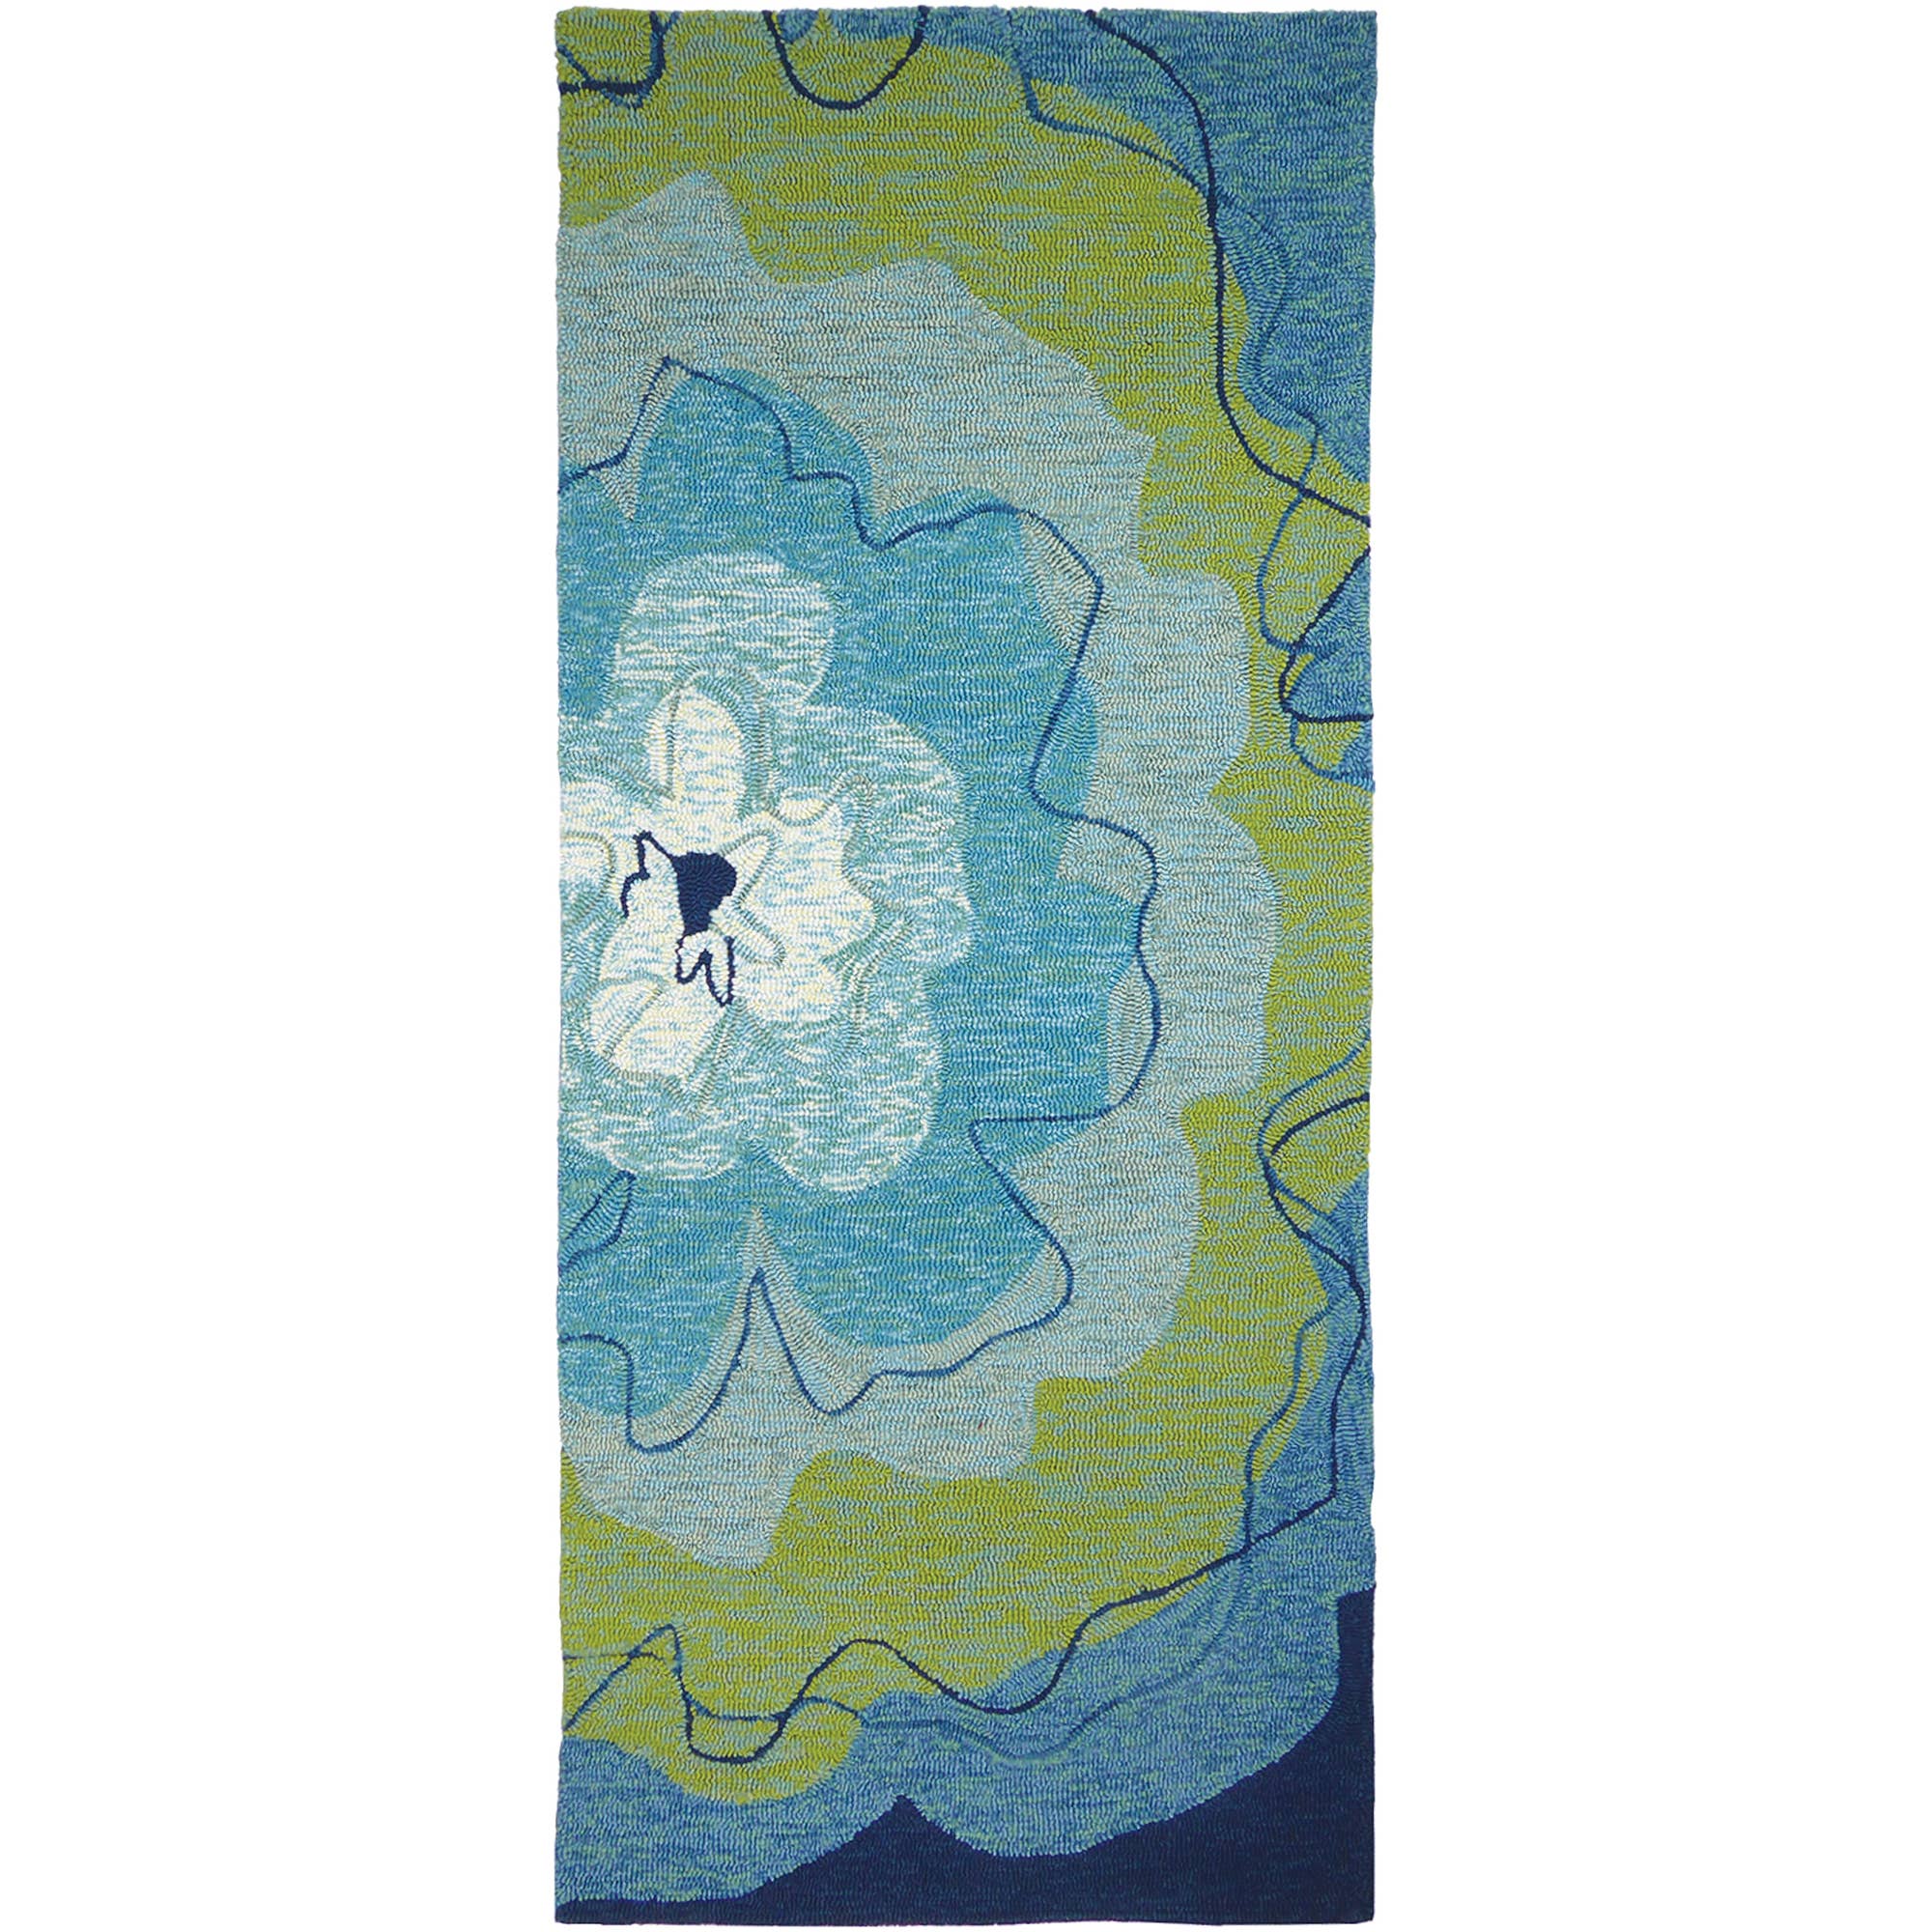 Jellybean Rug - Watercolor Blue Blossom Homefires Rug 22 x 34 in